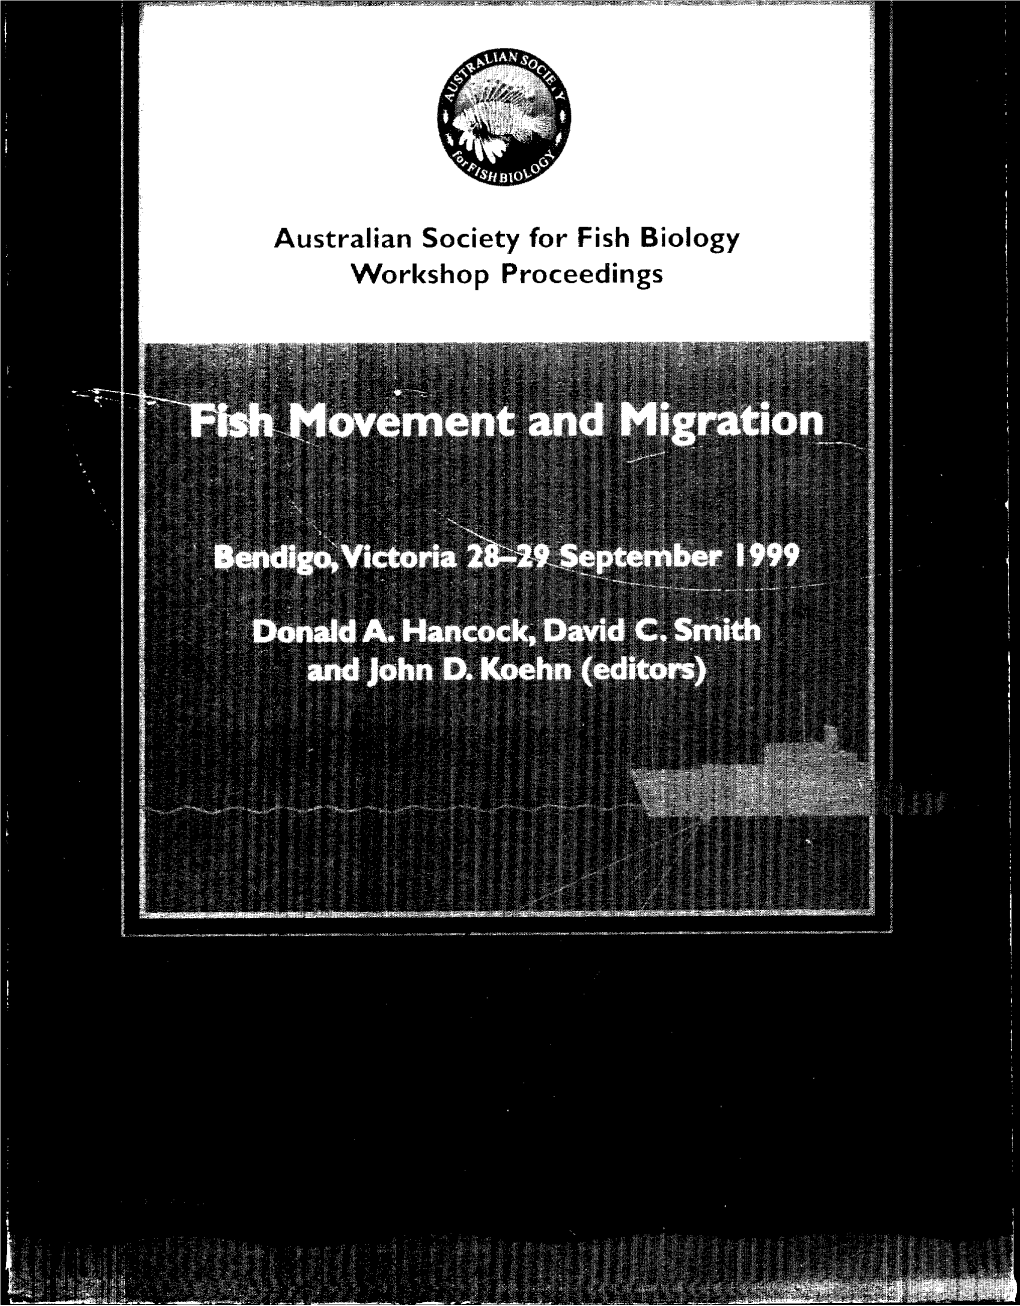 Fish Movement and Migration